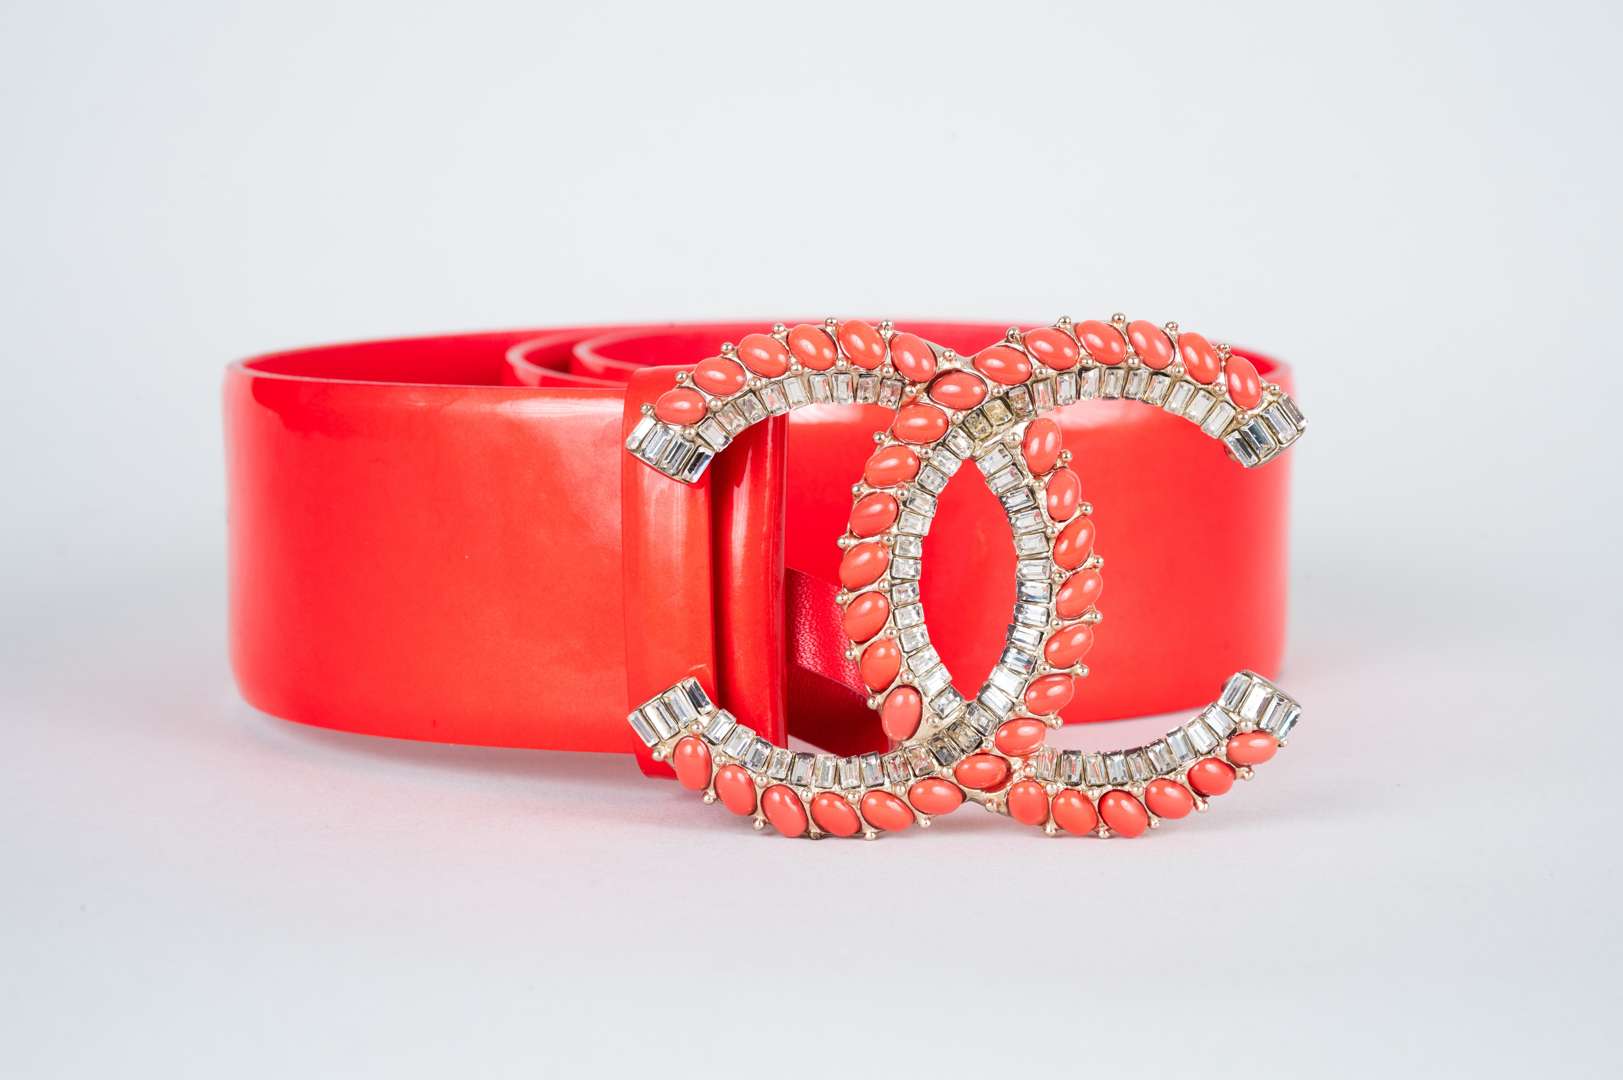 <p>CHANEL, coral red, patent leather belt</p>